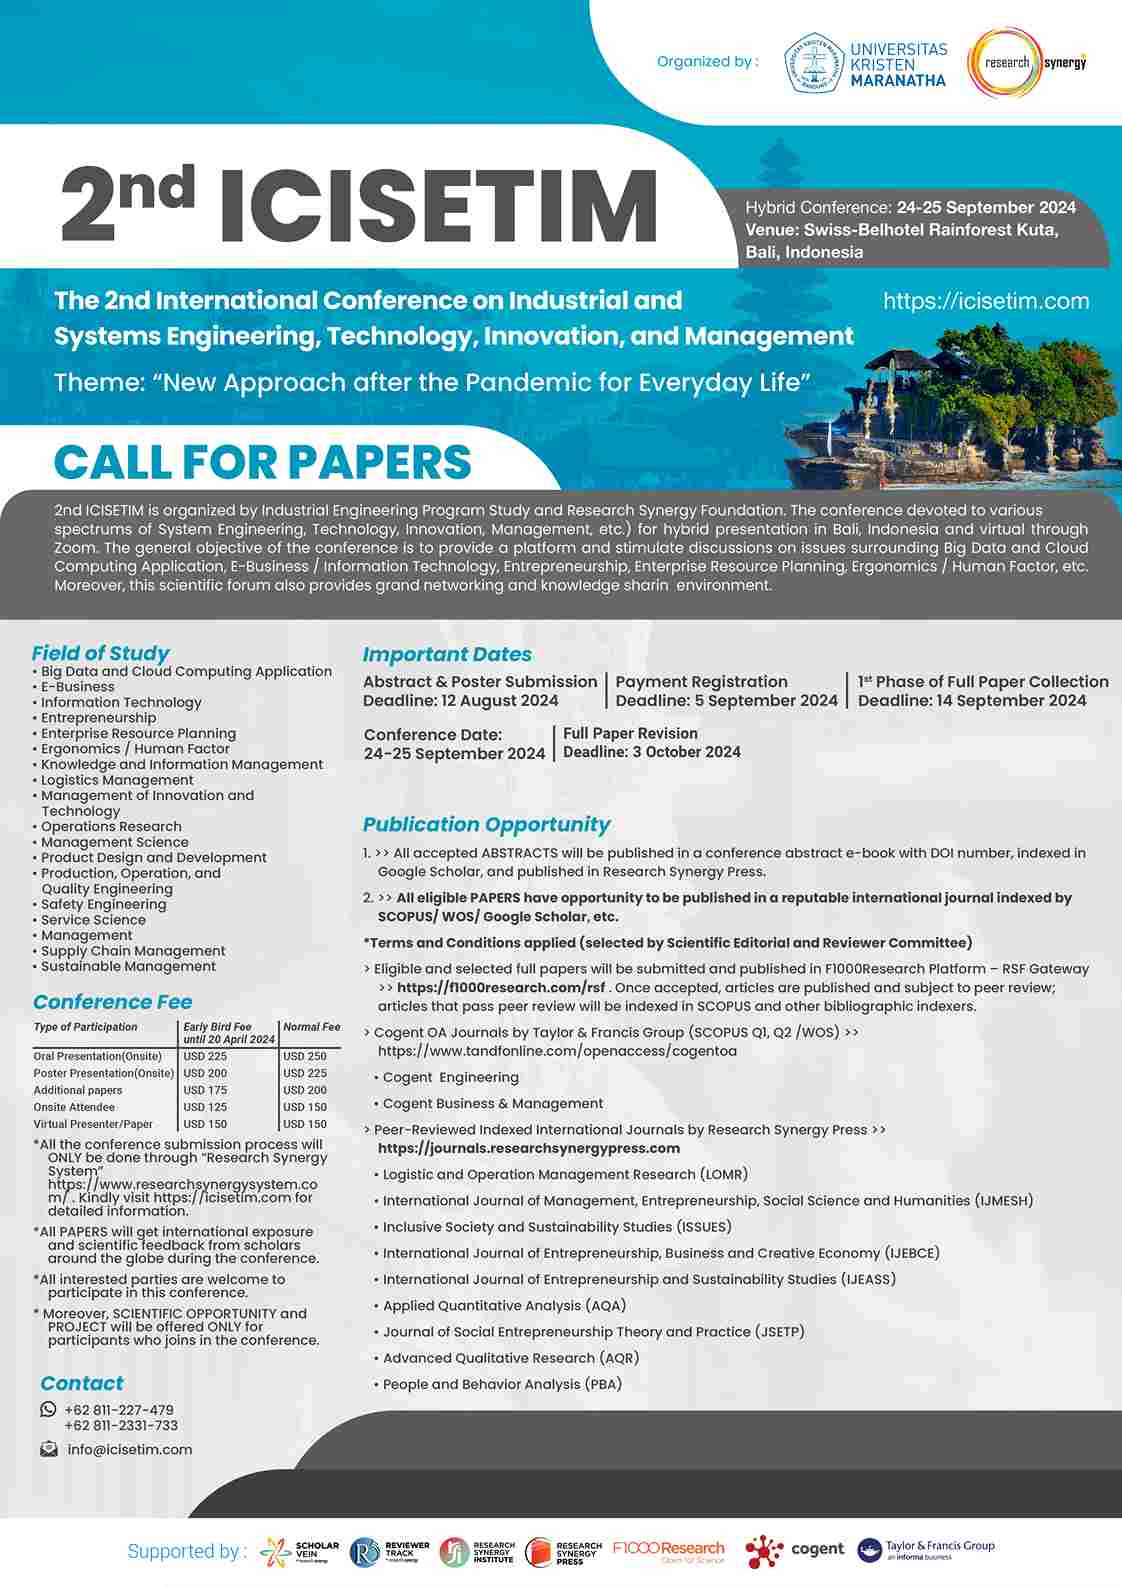 2nd International Conference on Industrial and Systems Engineering, Technology, Innovation, and Management